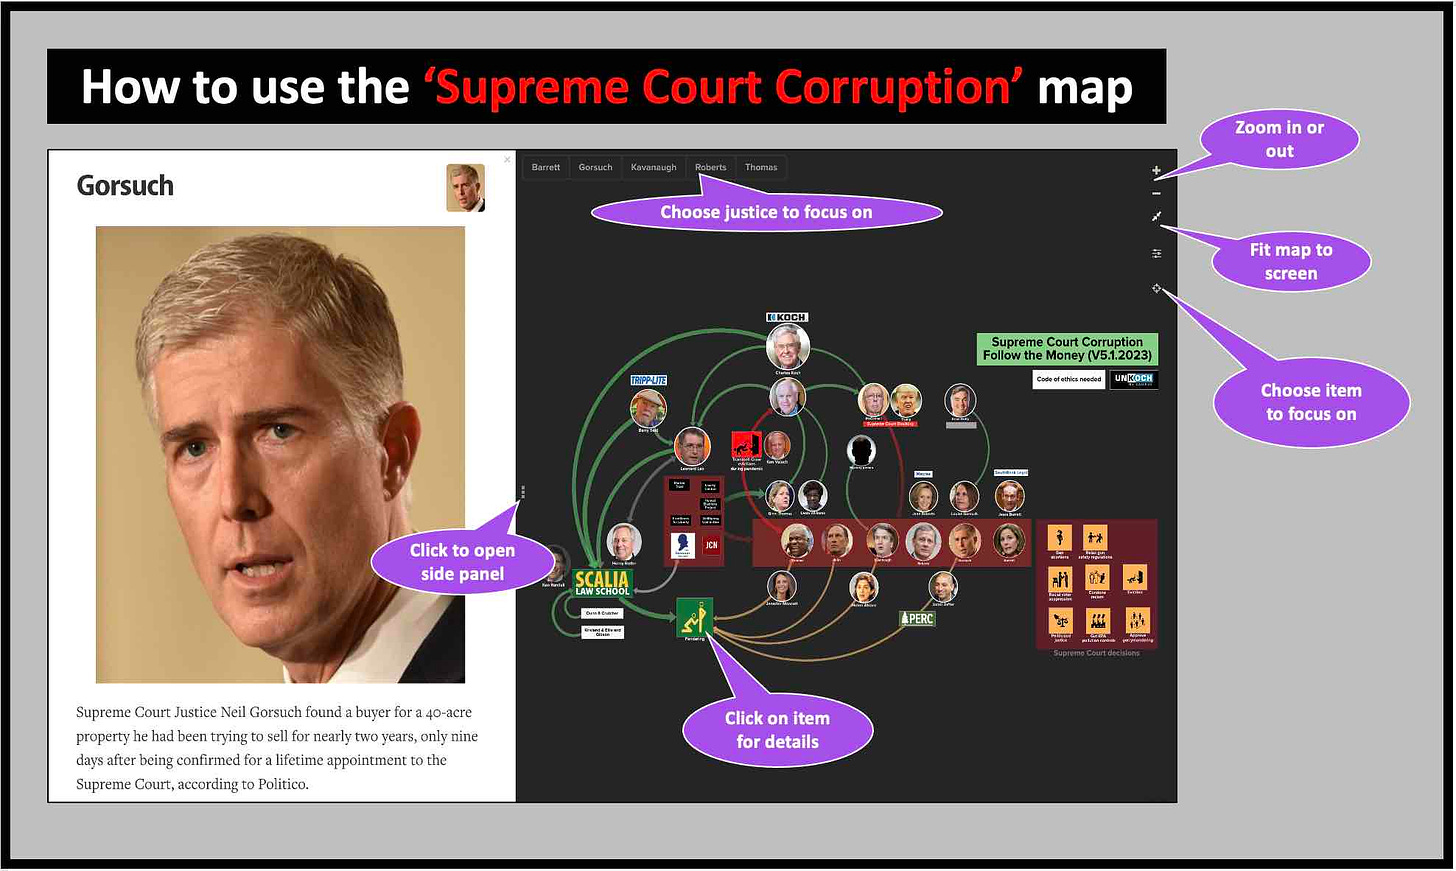 How to use the Supreme Court Corruption map